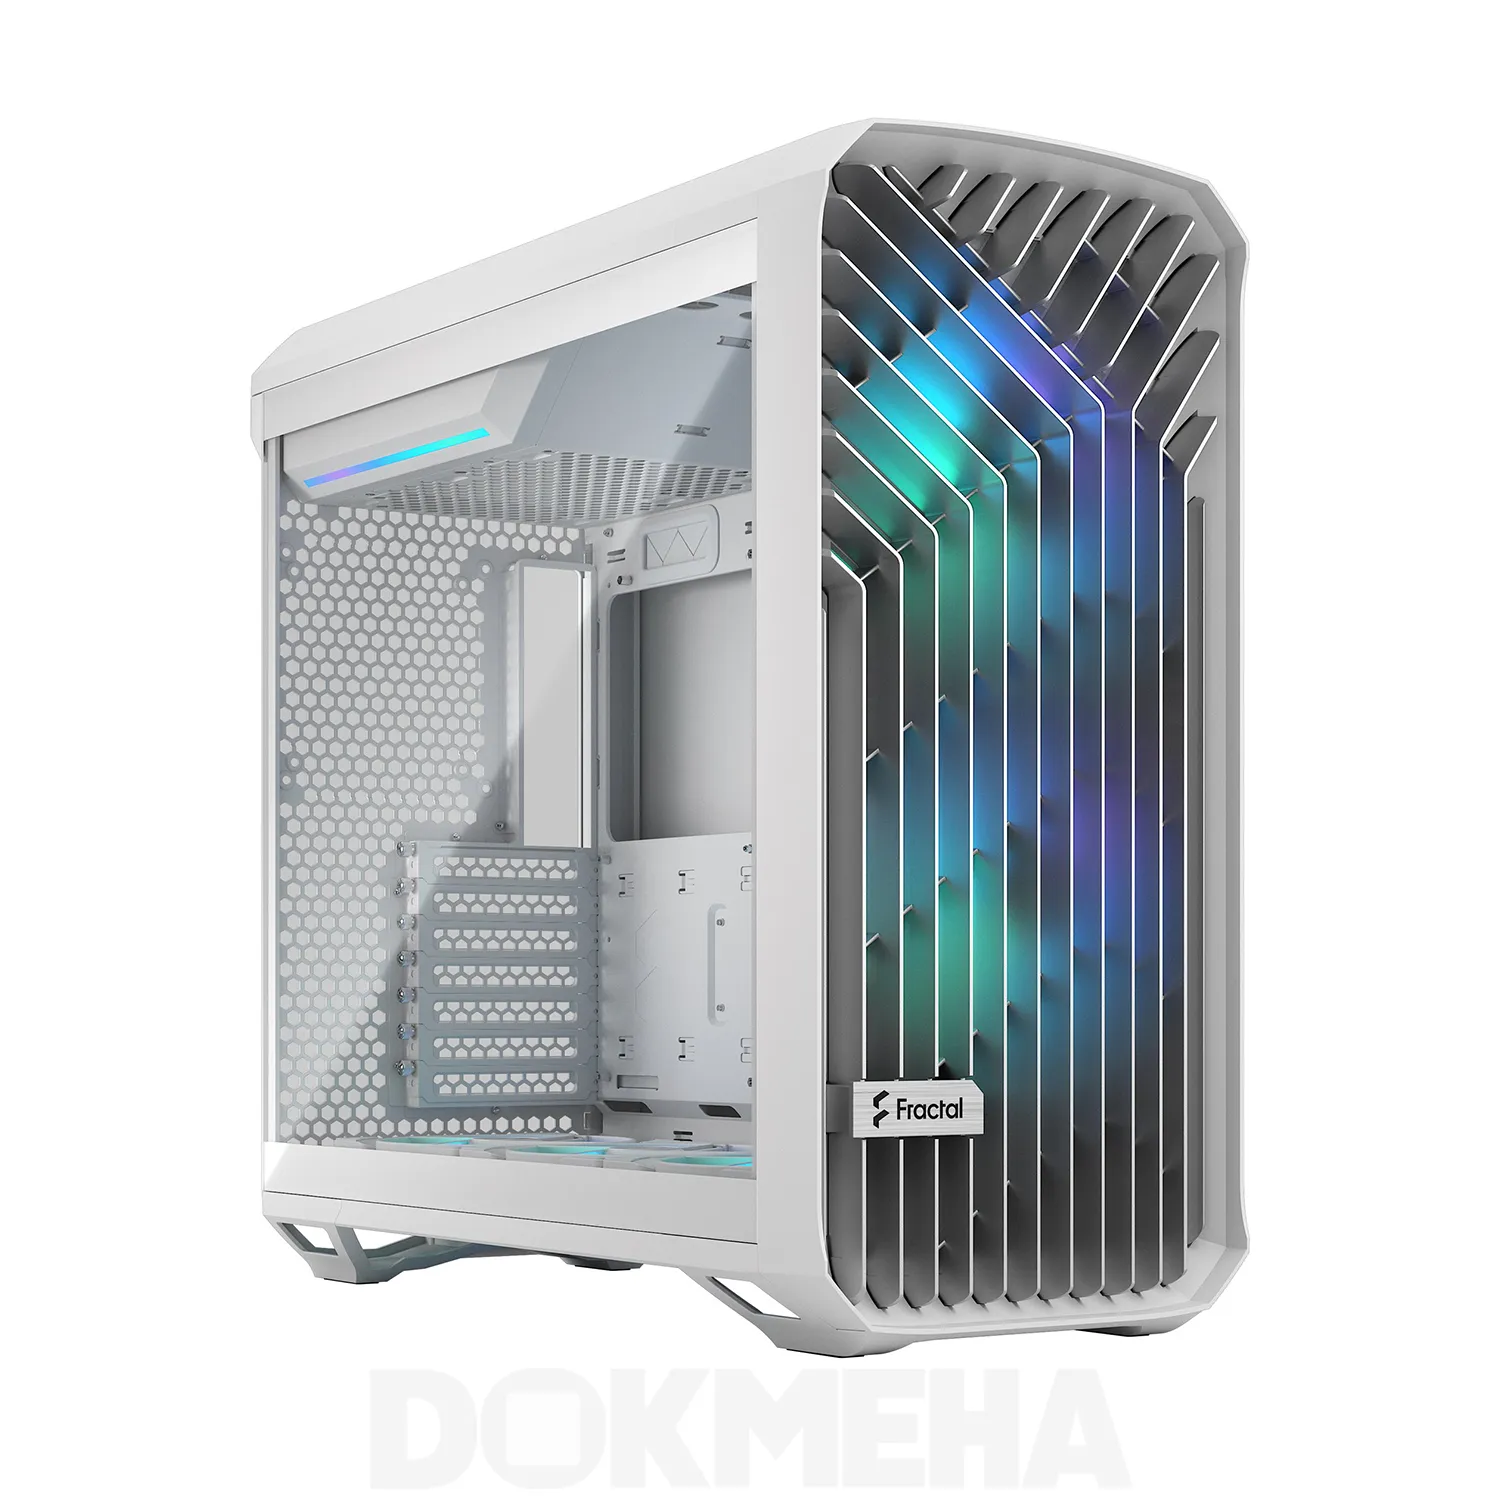 DOKMEHA W10000 Intel Xeon Scalable (3TH GEN) F-Class FULL Tower Workstation -1500 13